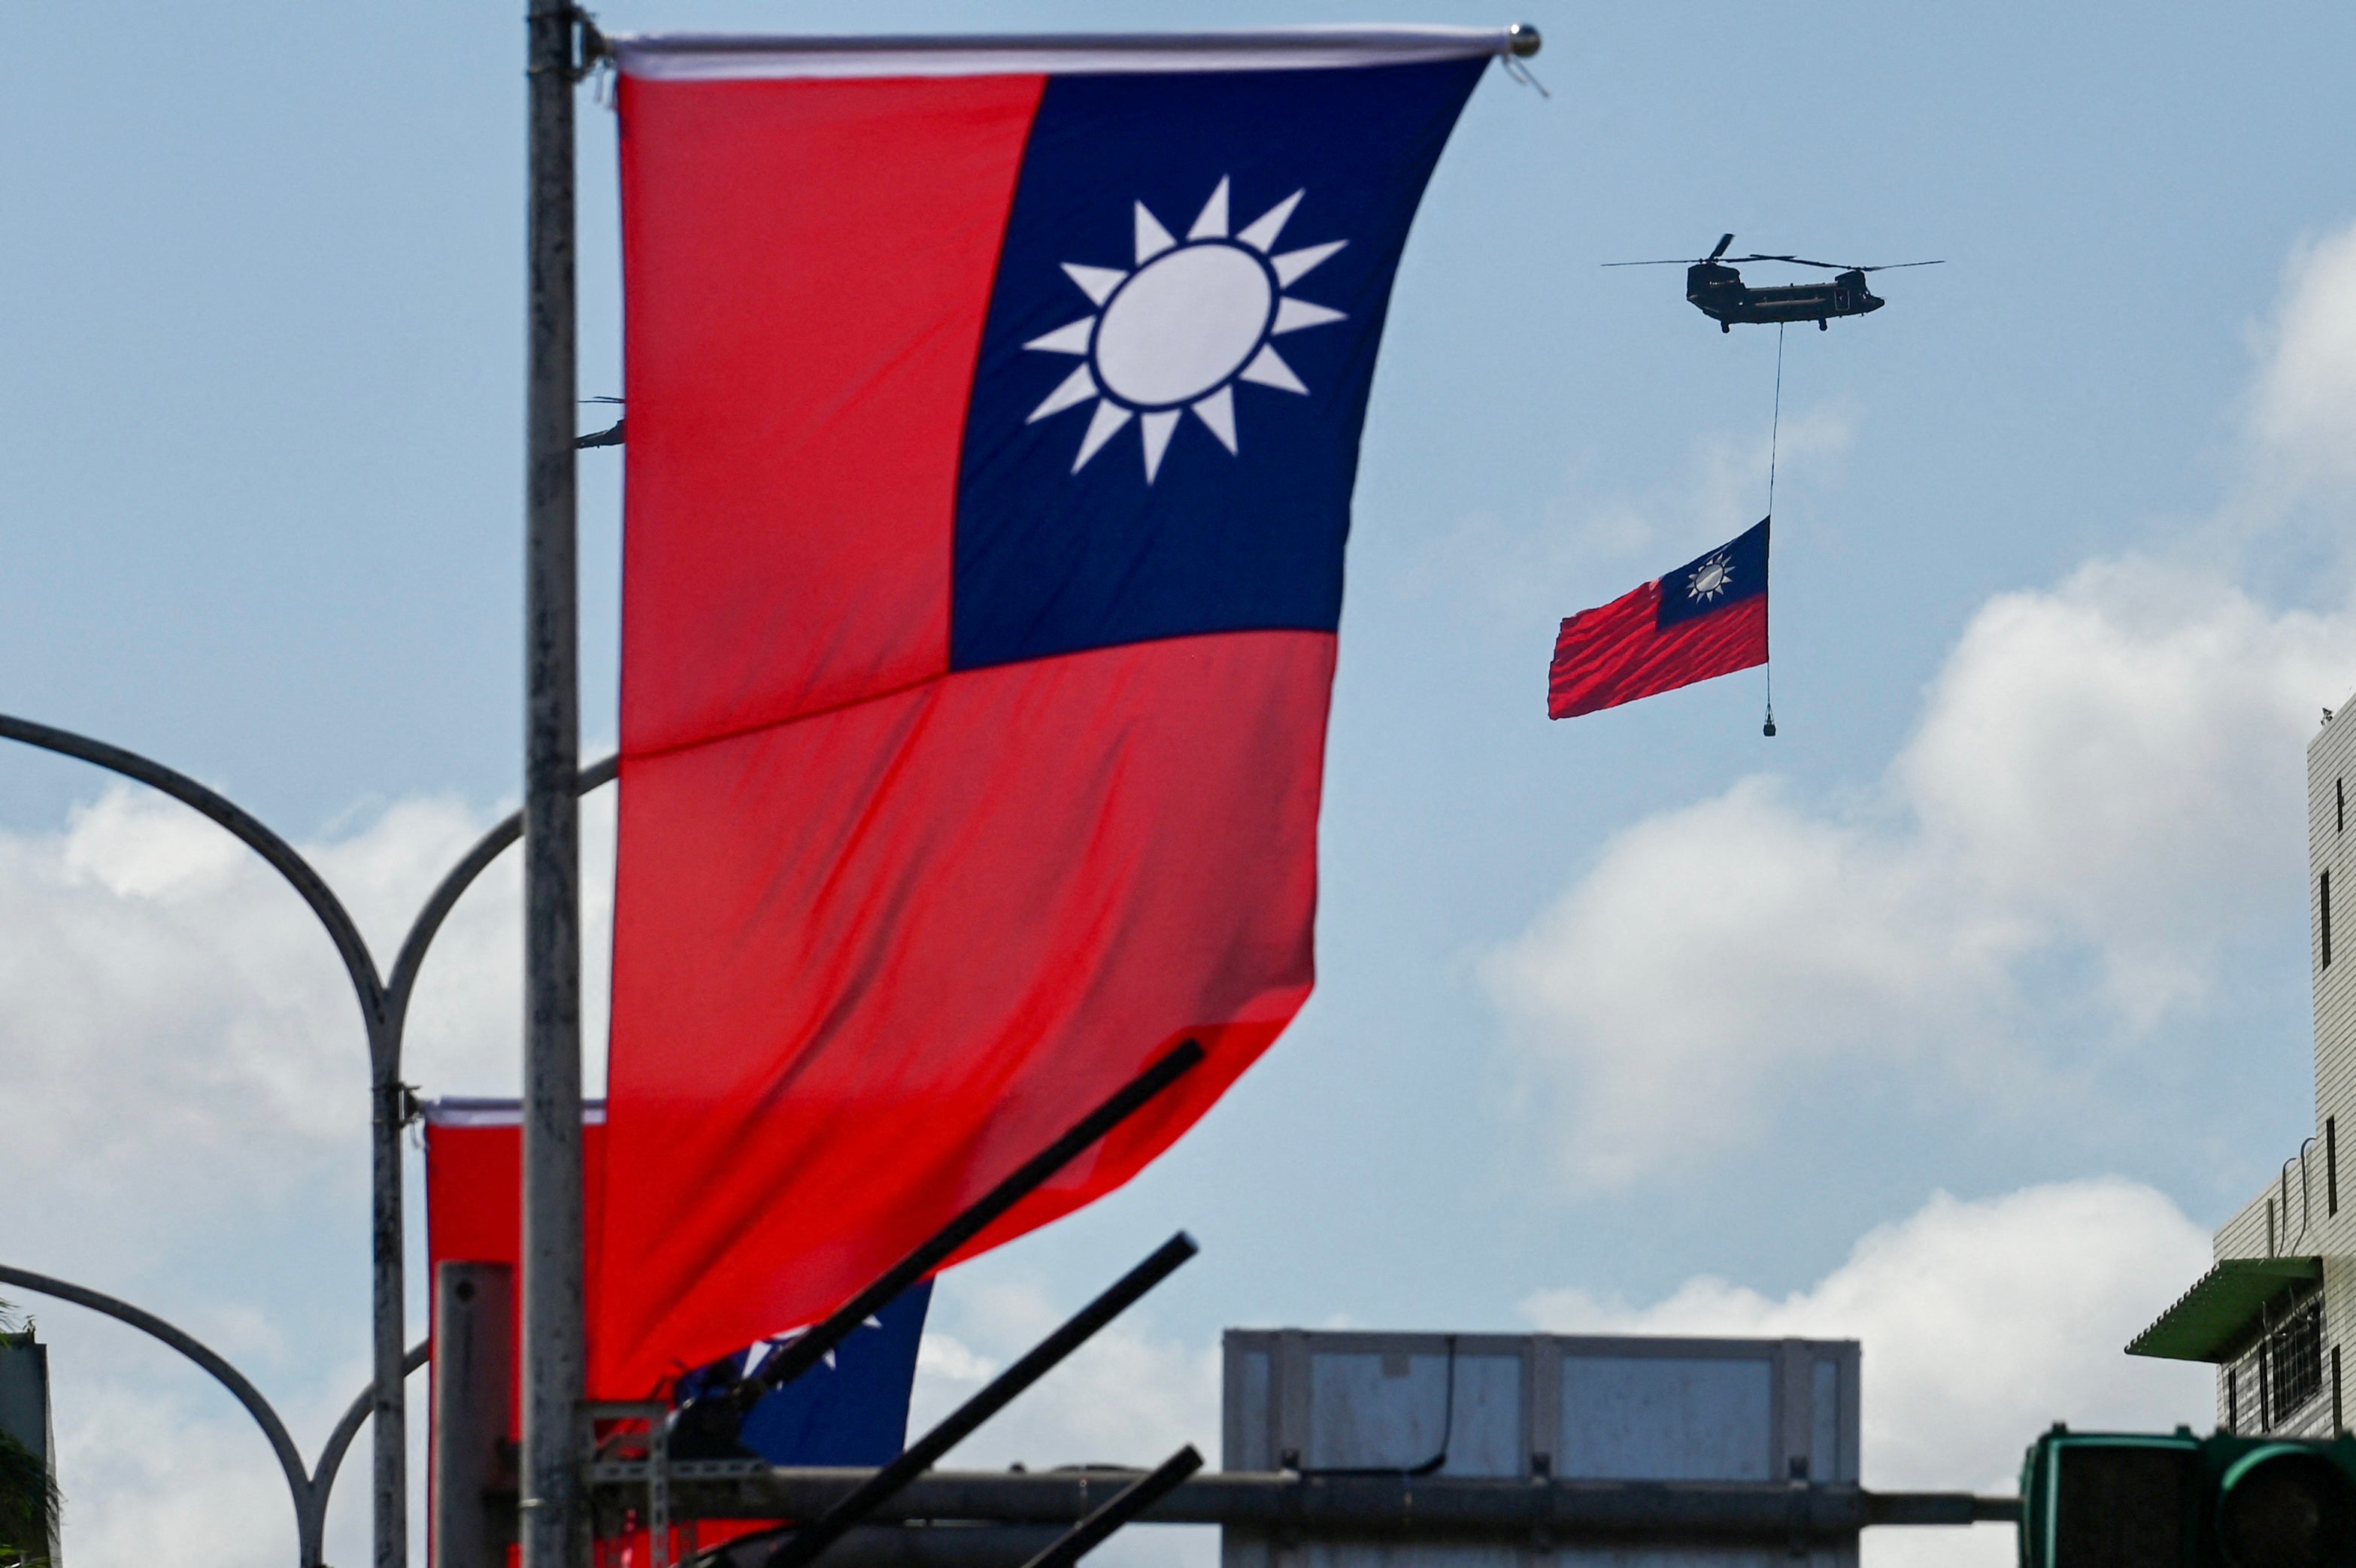 A CH-47 Chinook helicopter carries a Taiwan flag during national day celebrations in Taipei on 10 October 2021